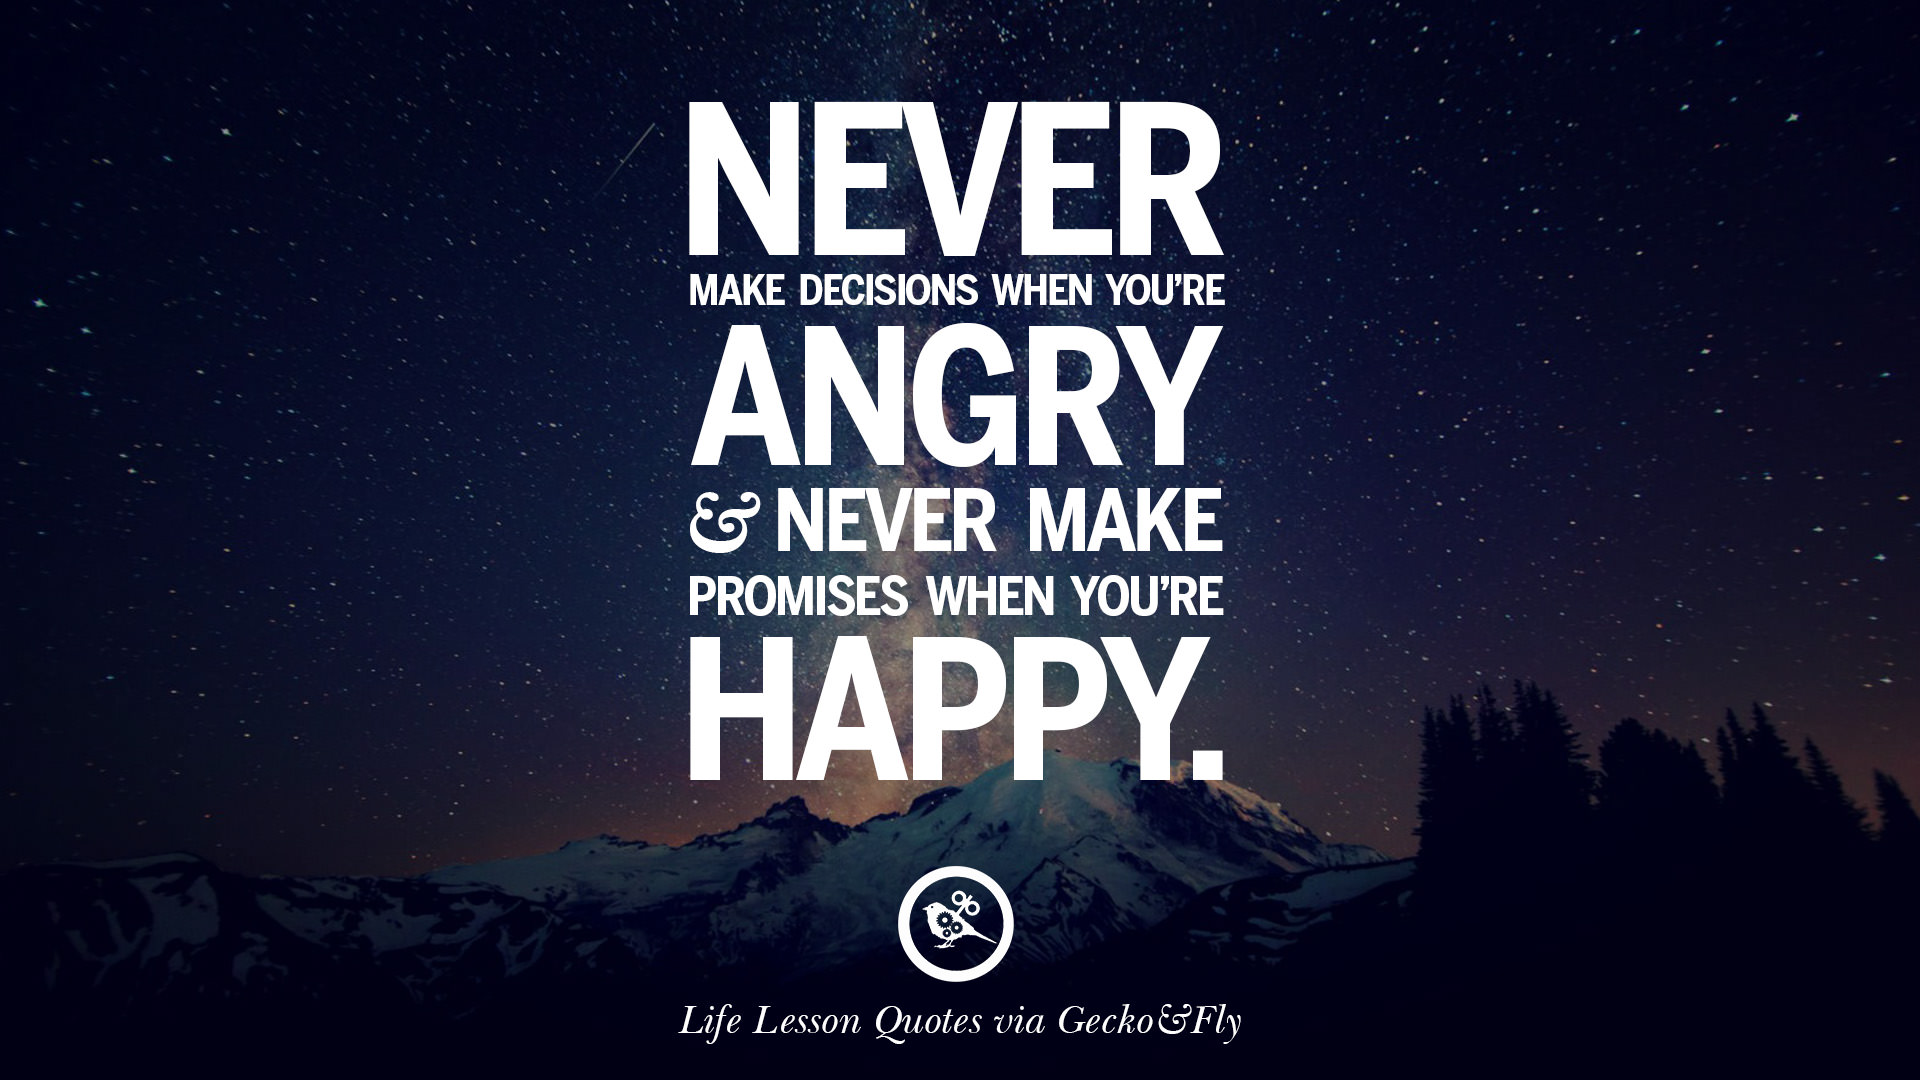 Never make decisions when you re angry and never make promises when you re happy